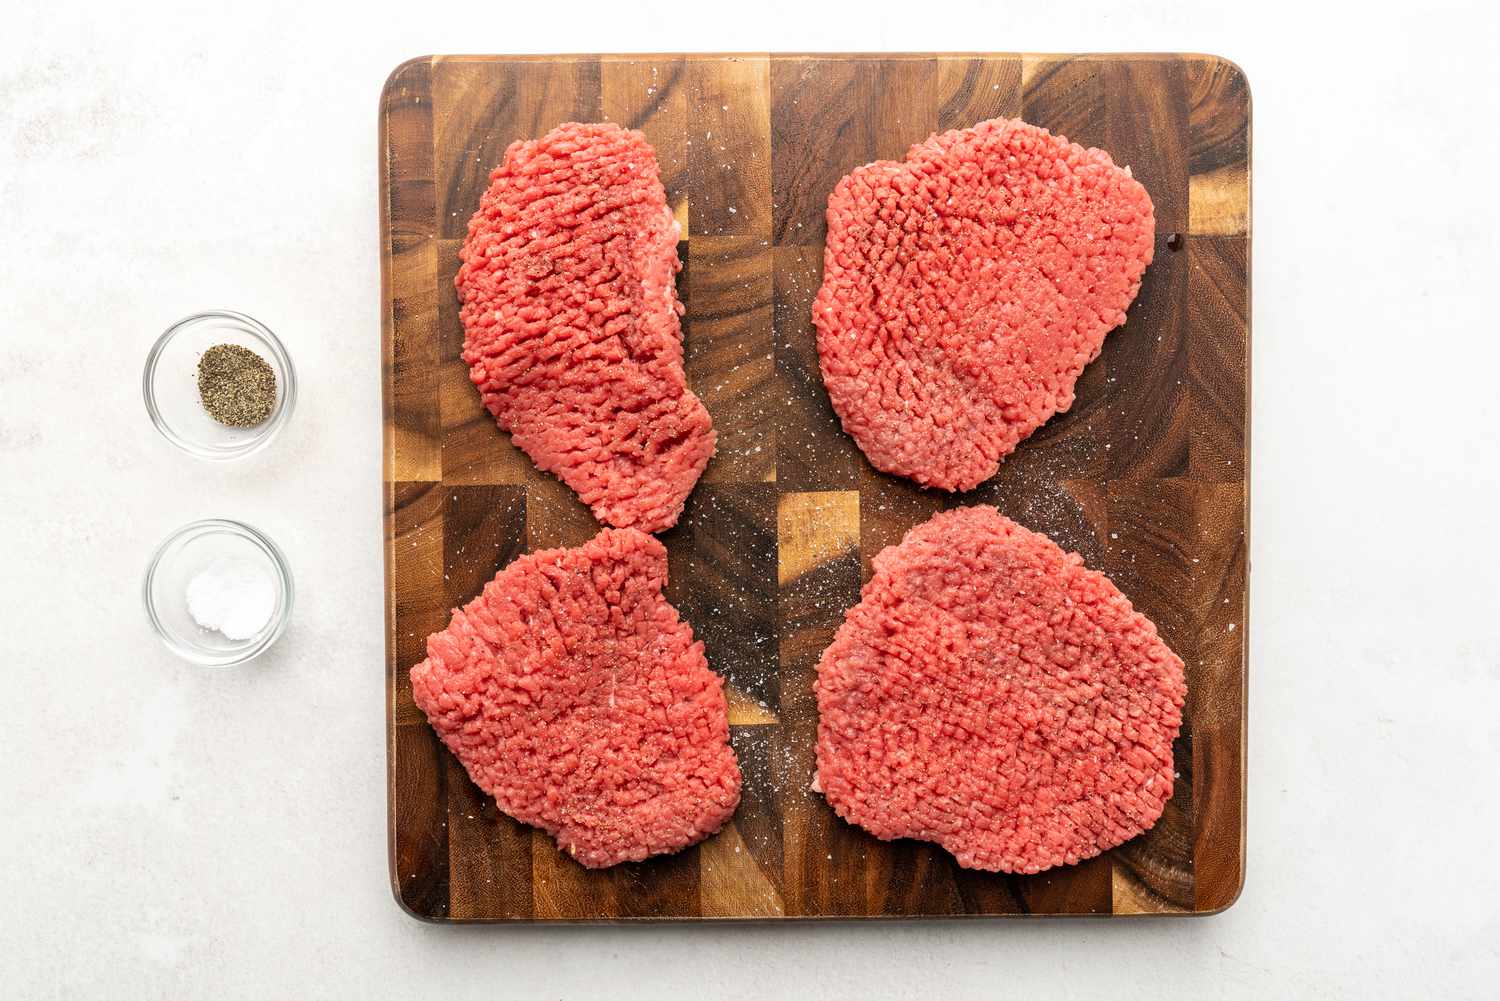 how-to-cook-beef-round-cubed-steak